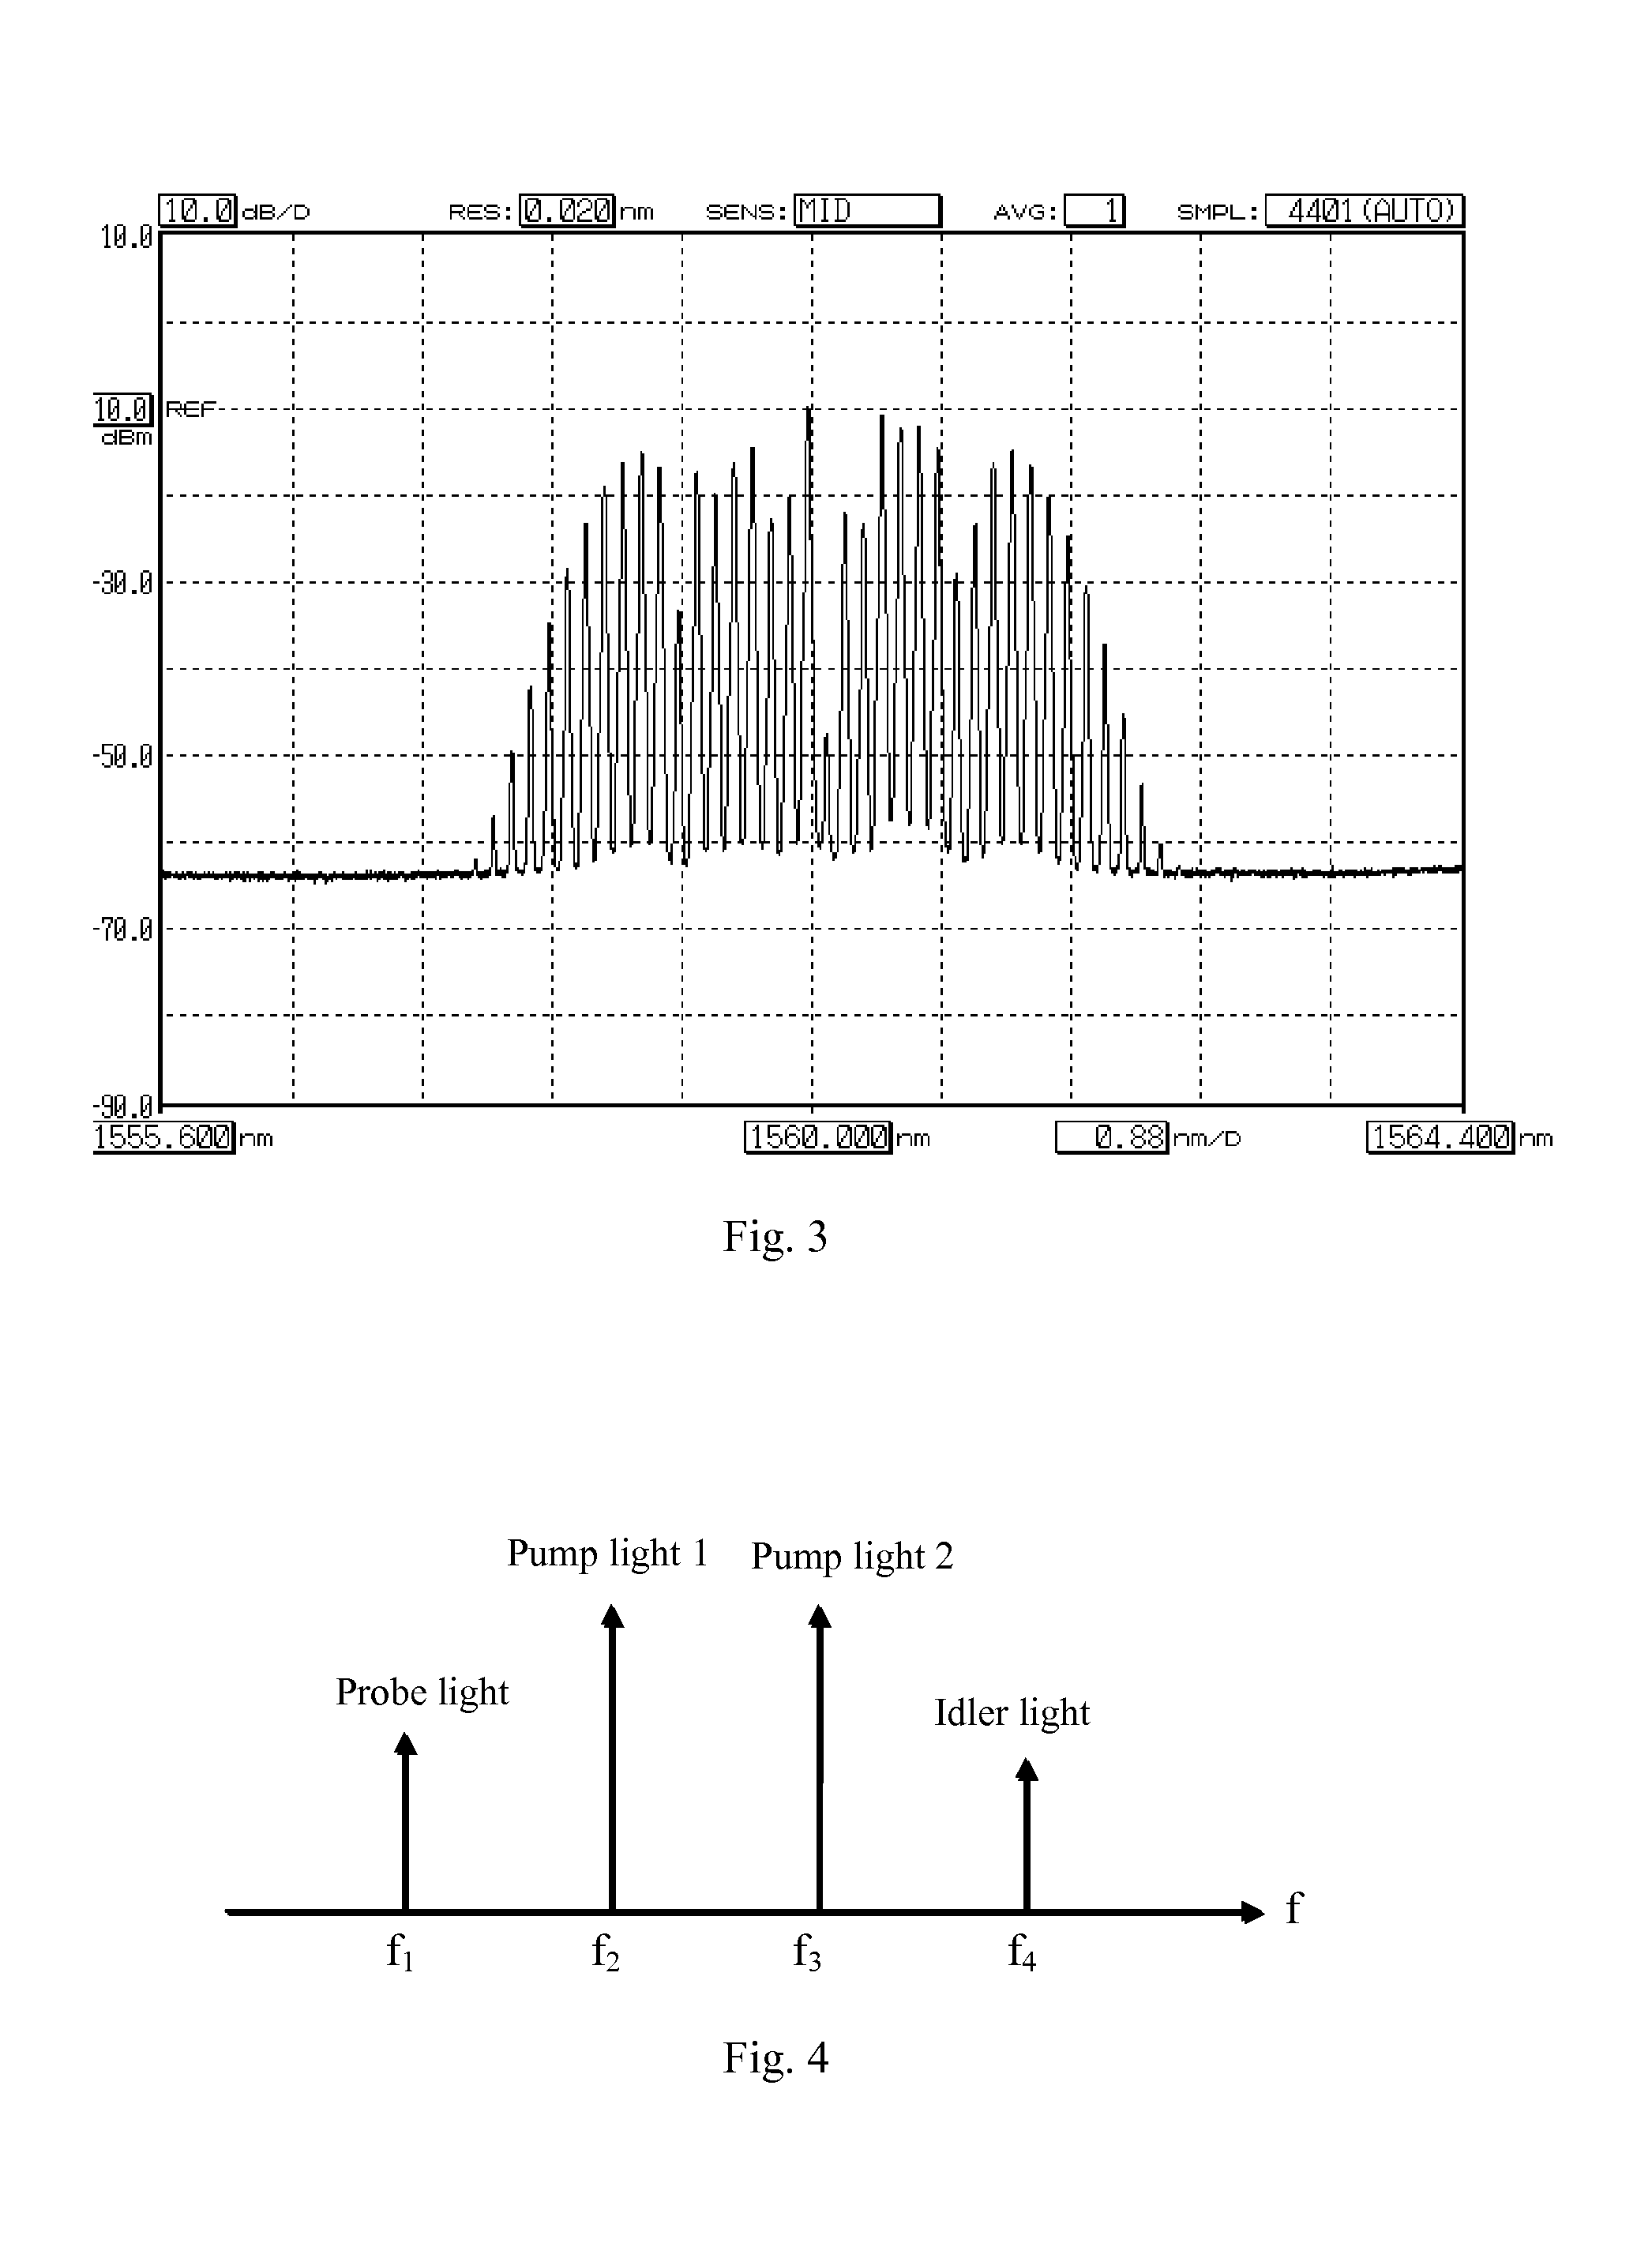 System and method for genrating an optical comb